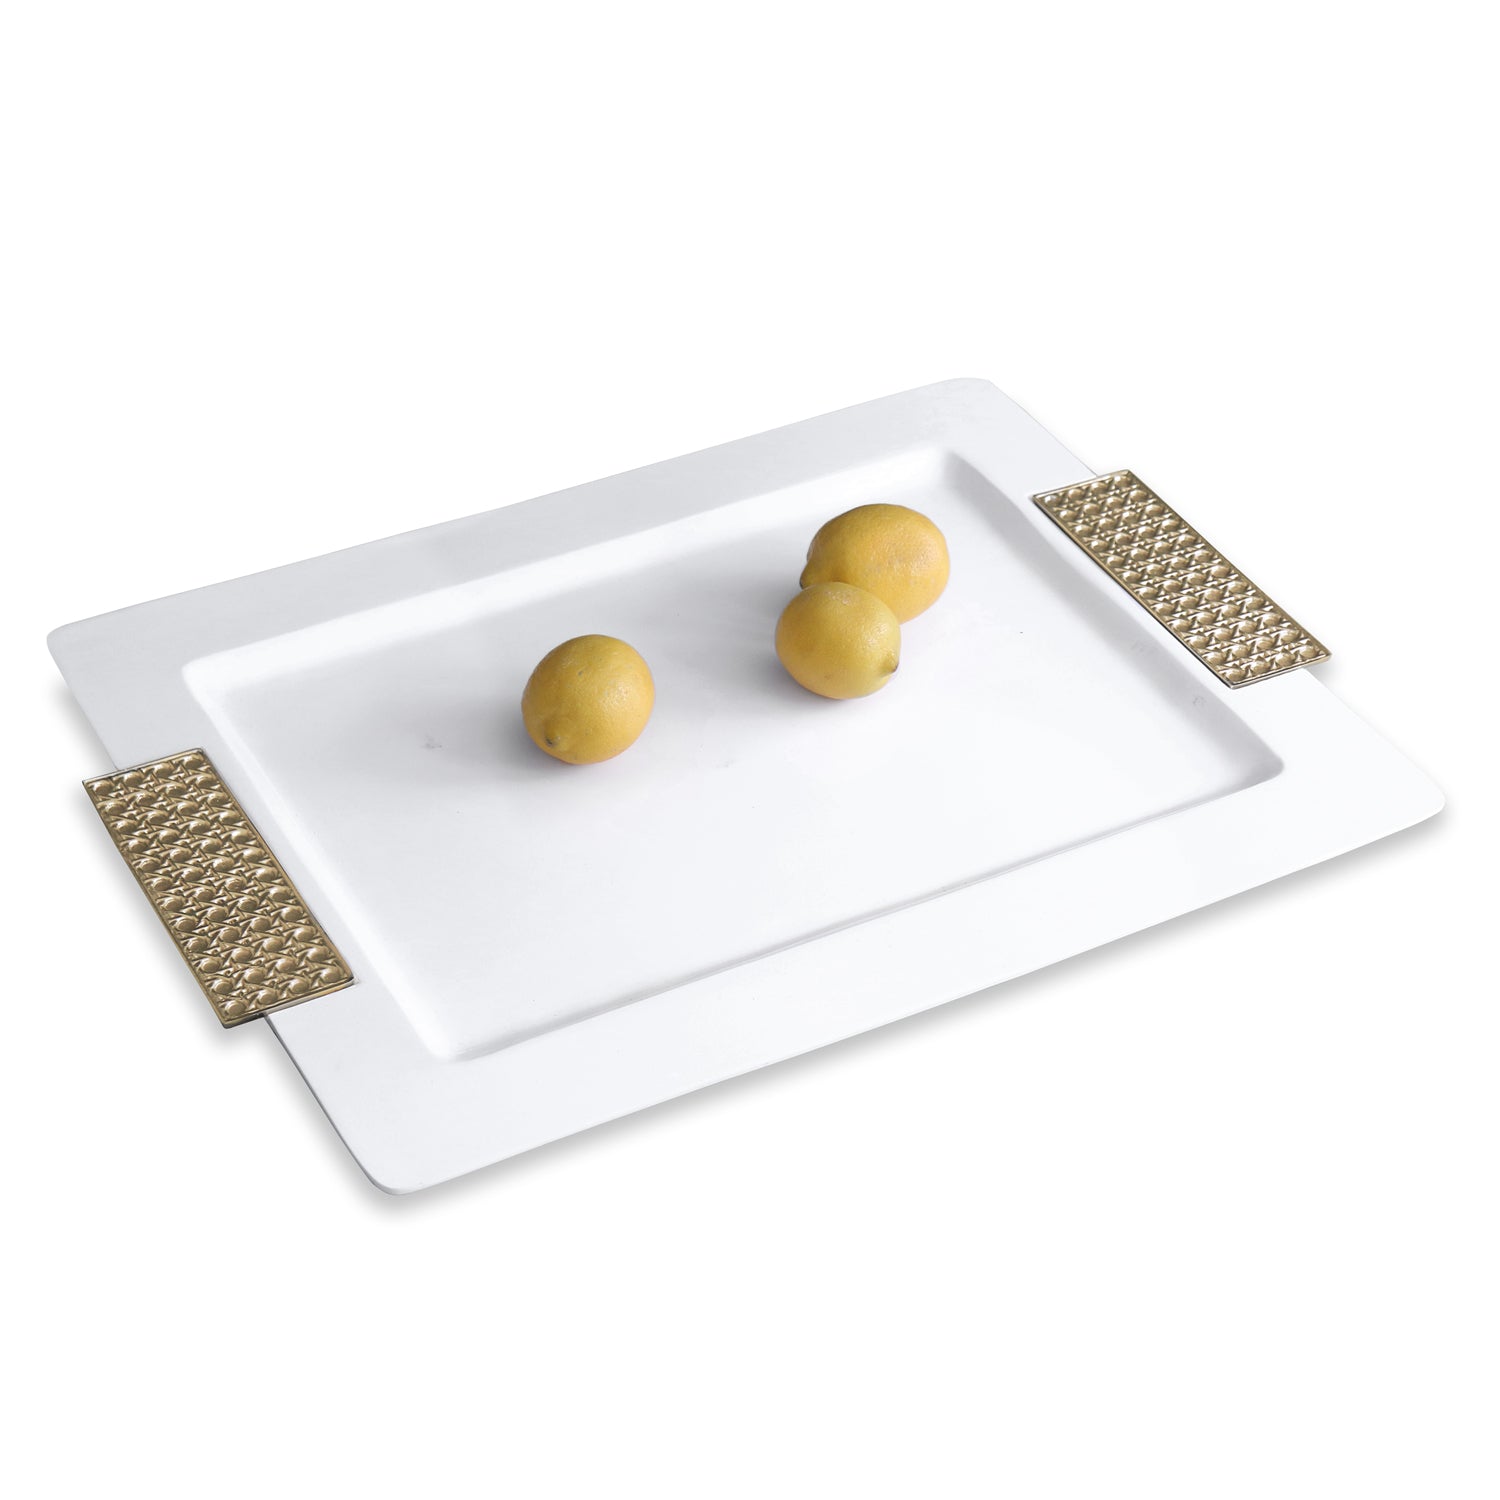 THANNI Rattan Large Rectangular Tray (White and Gold)